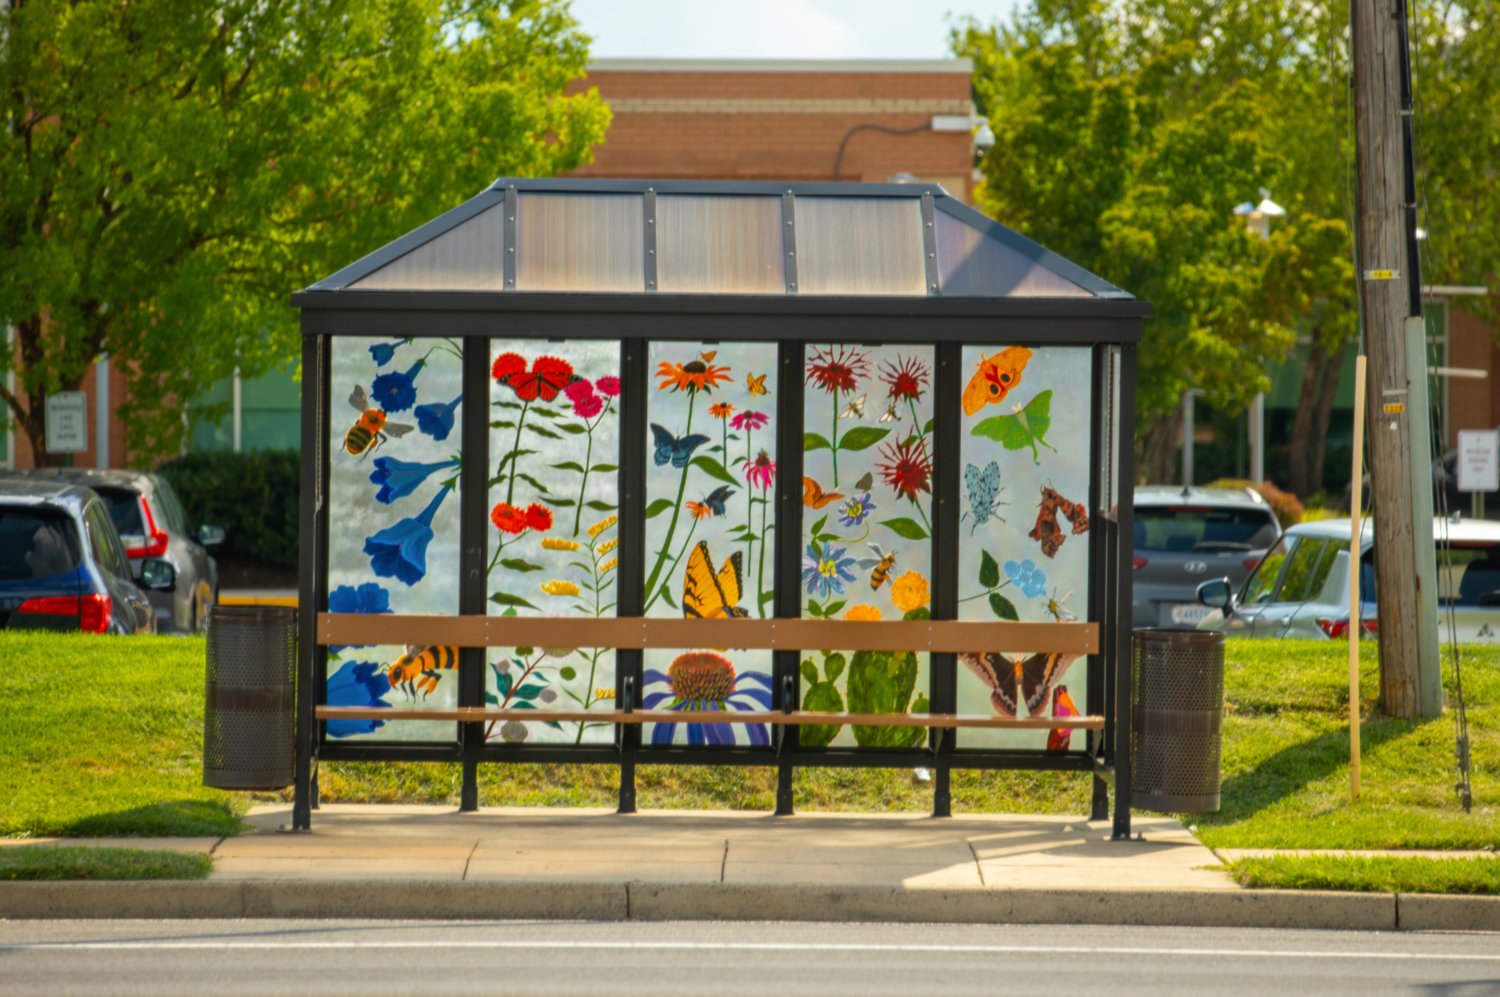 Beatified Omni Ride bus shelter at Sudley Road and Diggs (in front of NOVANT Health) Artist: Emily Thomson